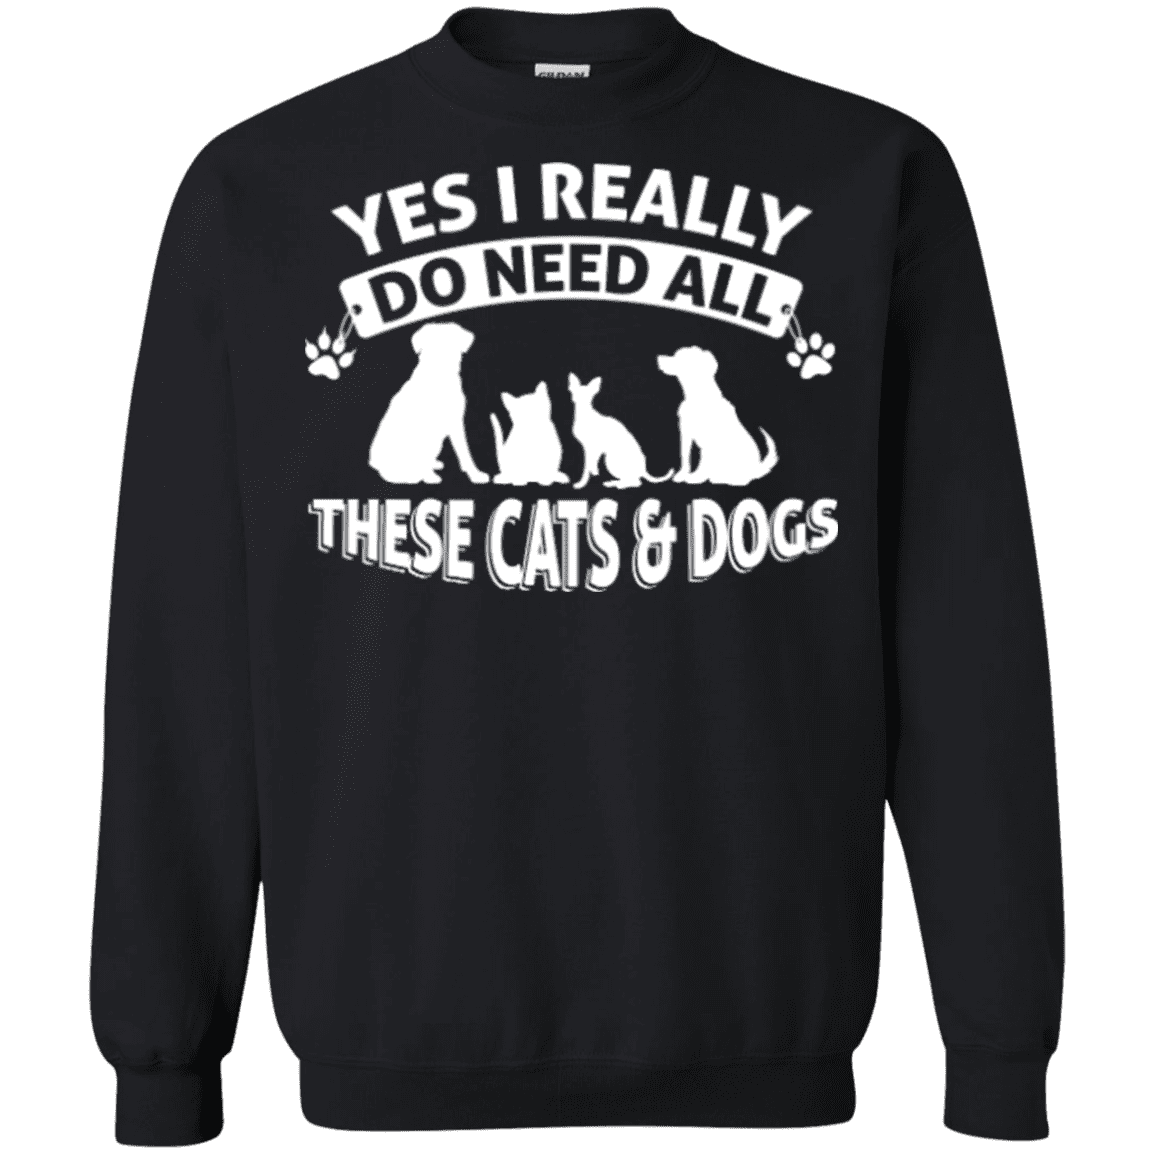 Yes I Need All These Cats and Dogs - Sweatshirt.